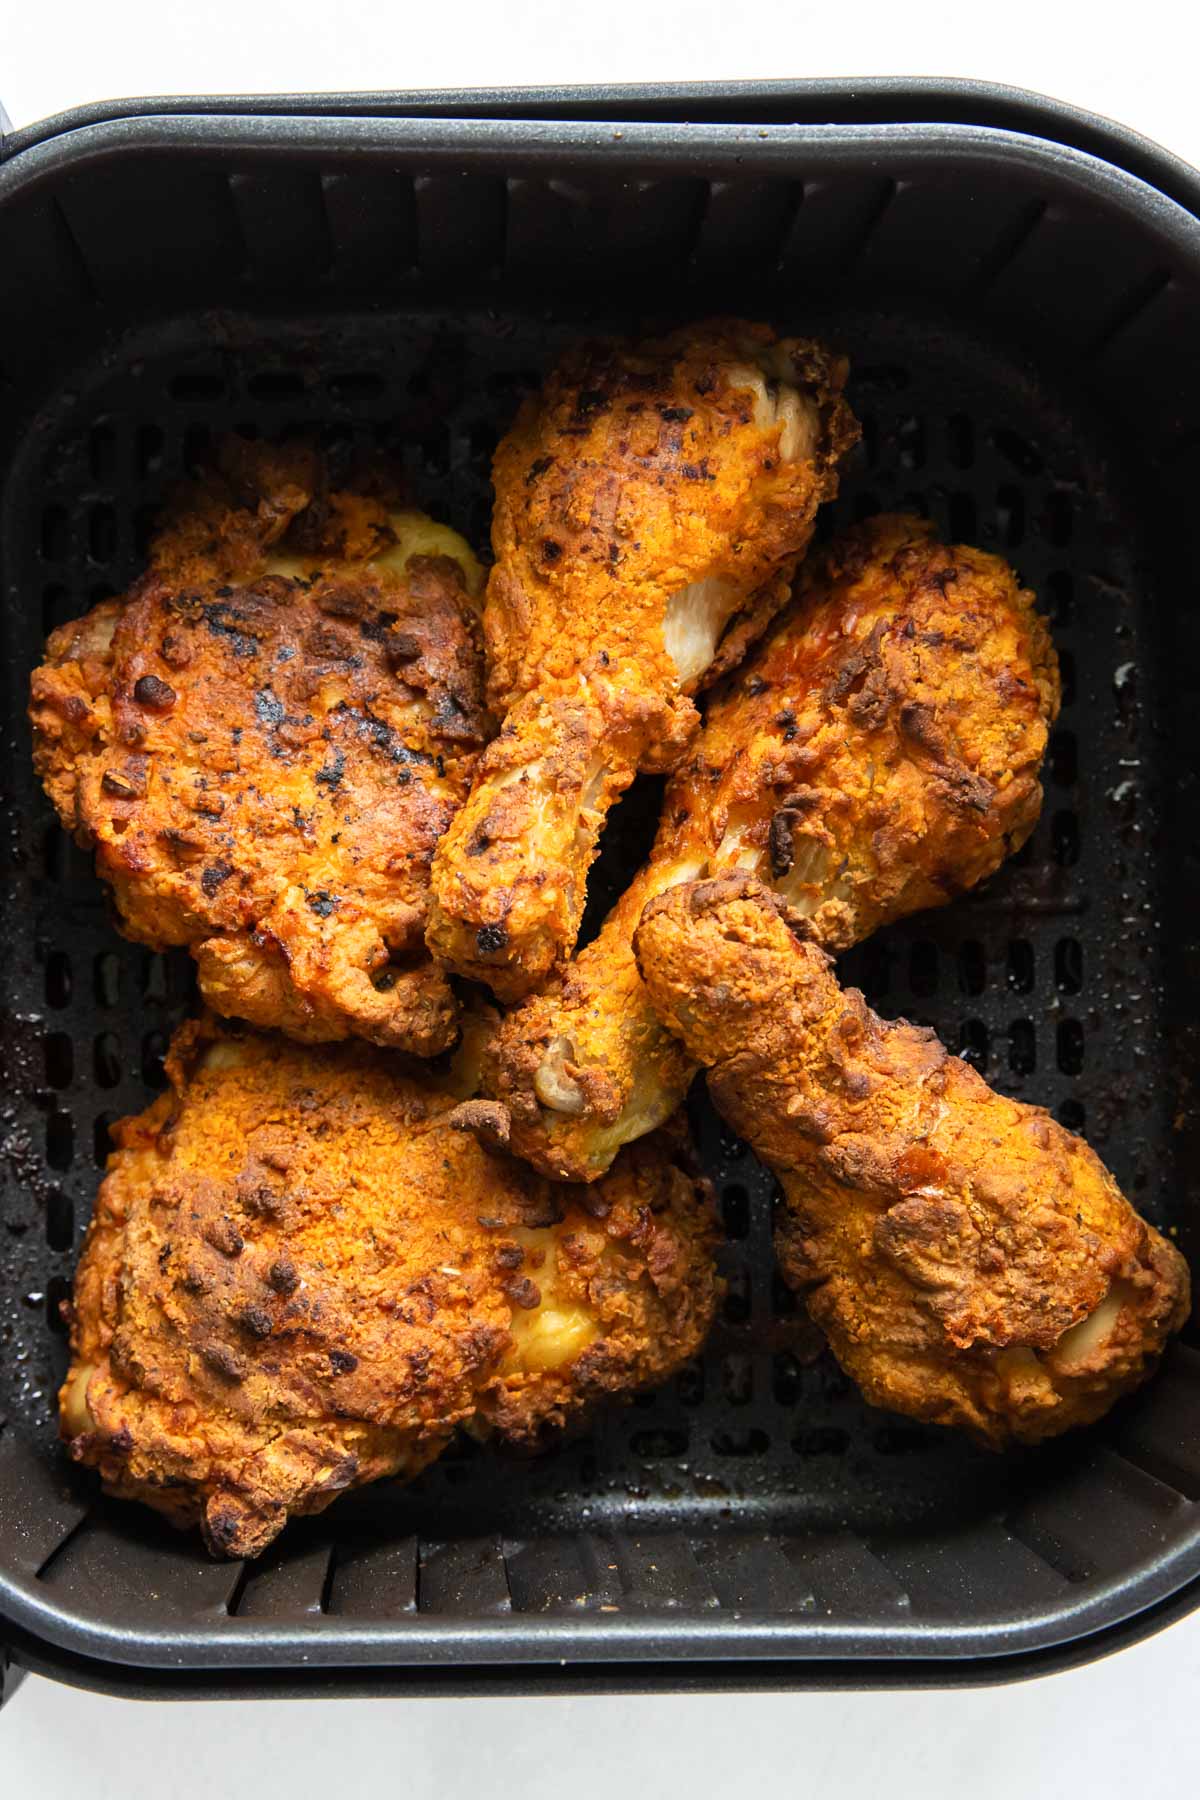 fried chicken legs and thighs in air fryer basket